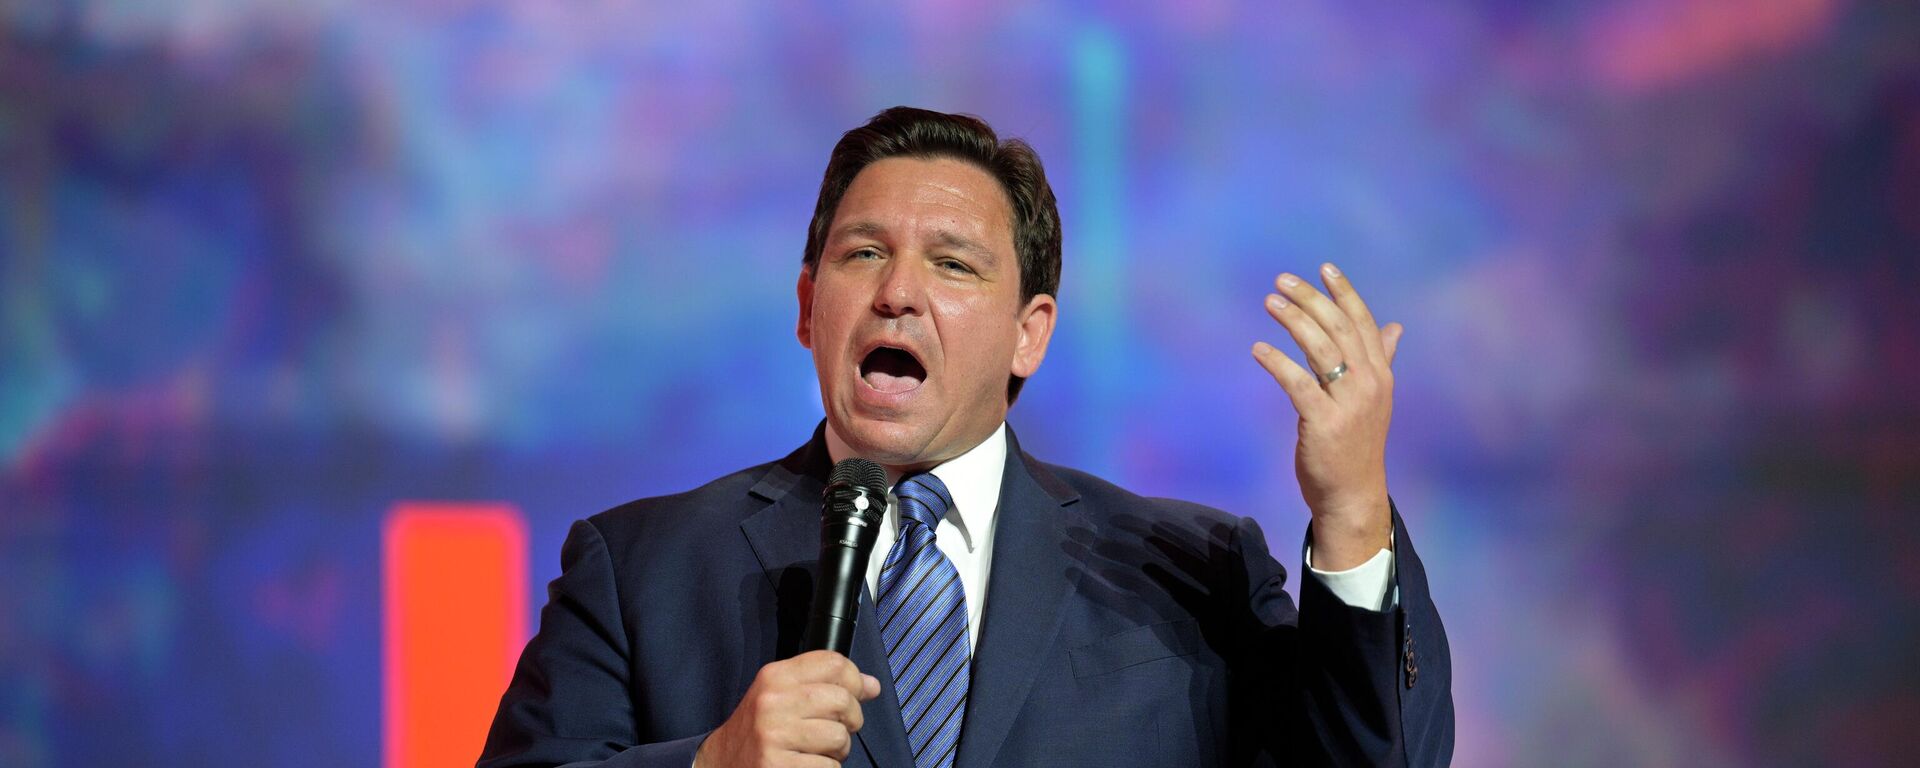 FILE - Florida Gov. Ron DeSantis addresses attendees during the Turning Point USA Student Action Summit, Friday, July 22, 2022, in Tampa, Fla. - Sputnik International, 1920, 05/25/2023